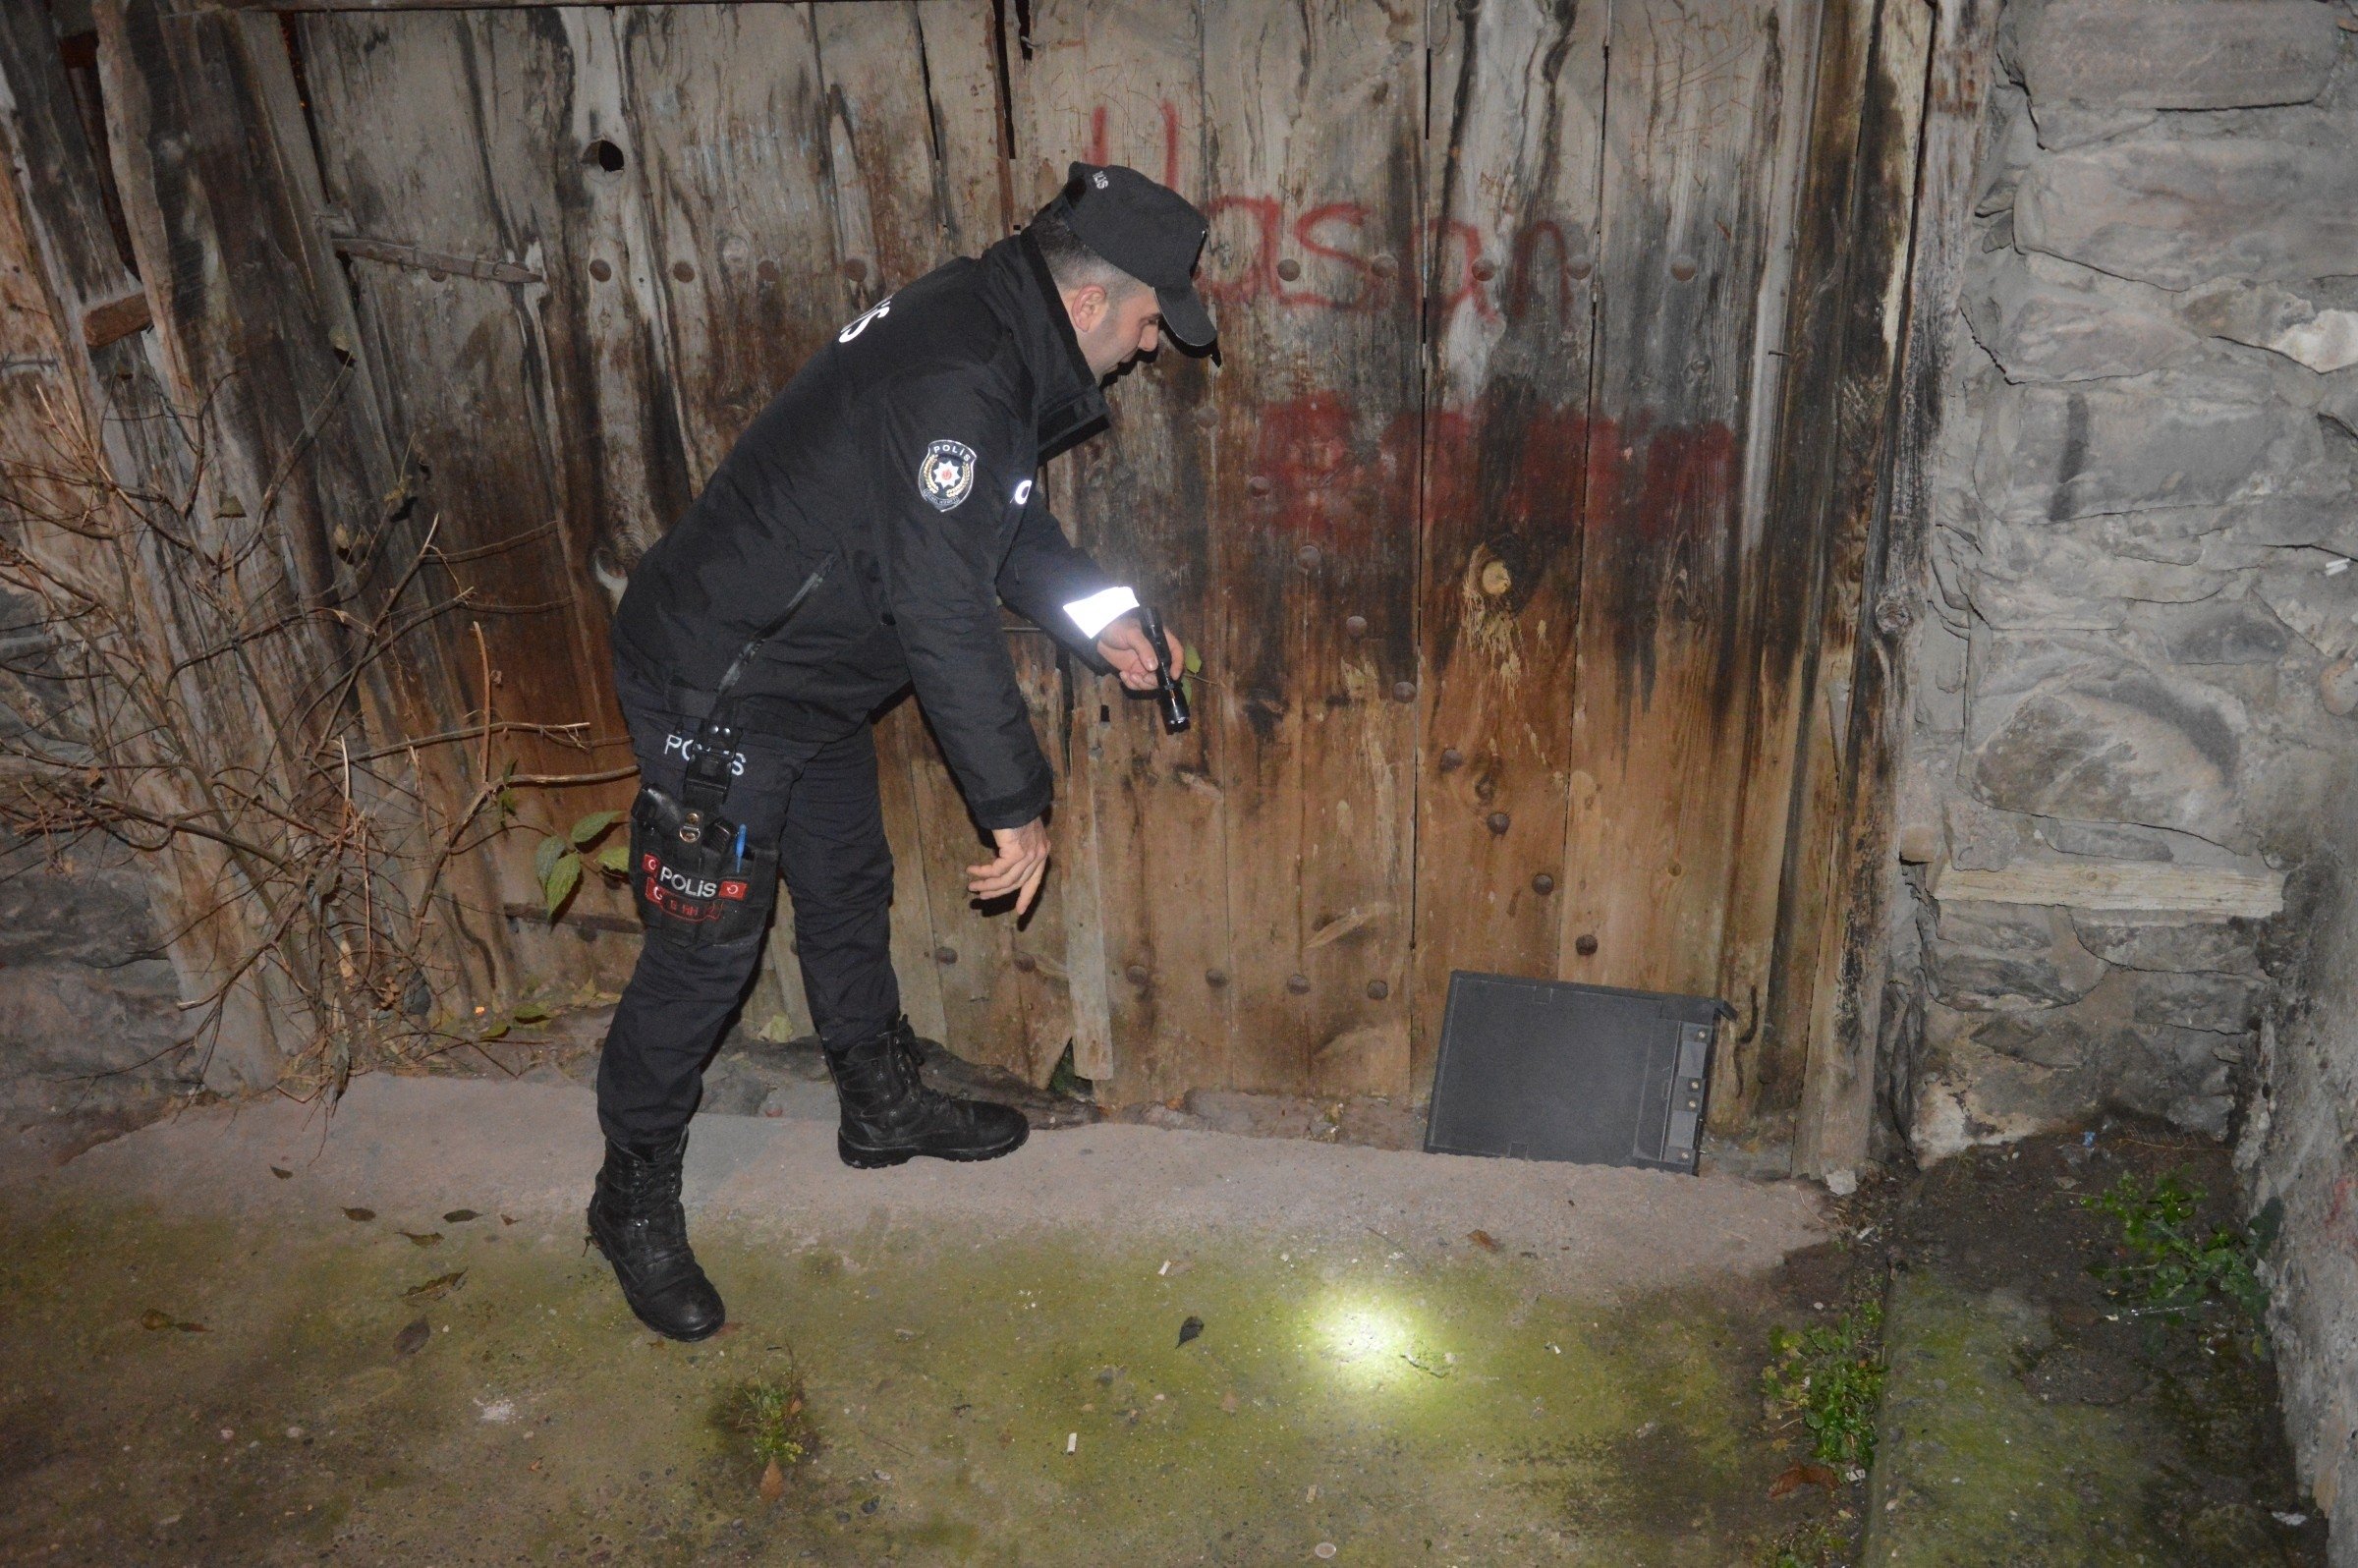 The empty safe discarded by the suspect is inspected by a police officer, Tokat province, northern Turkey, Dec. 11, 2022. (IHA Photo).